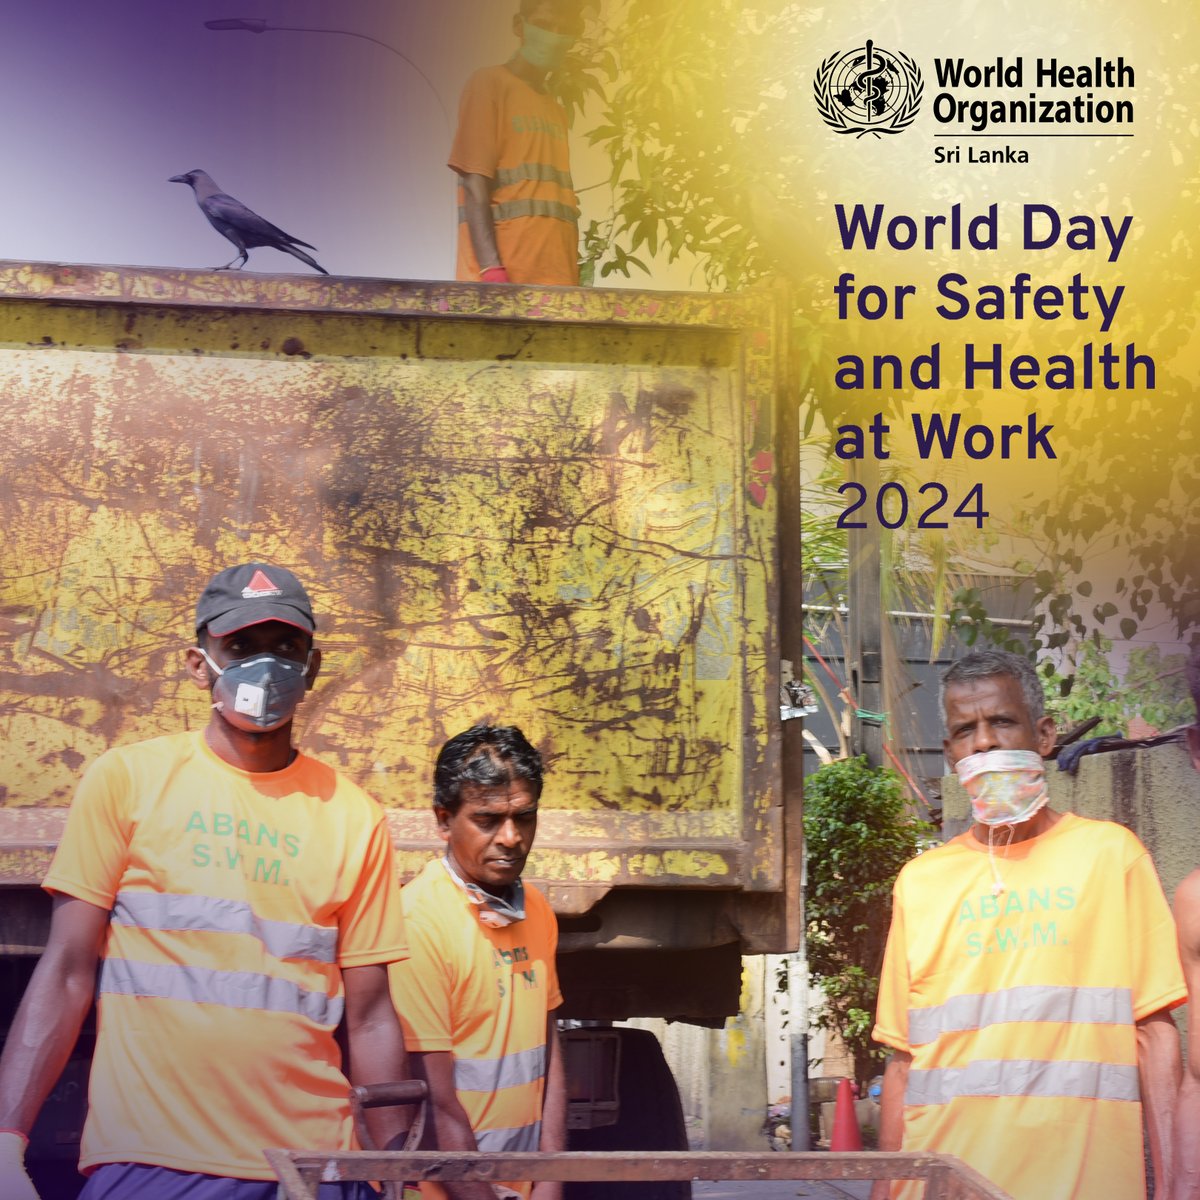 World Day for Safety and Health at Work 2024 Rally for action in ensuring a healthy workforce in a changing climate now and beyond. There is no time to waste #WorldWHSDay2024 #SafeDay2024 @WHOSEARO @ILOColombo @WHO